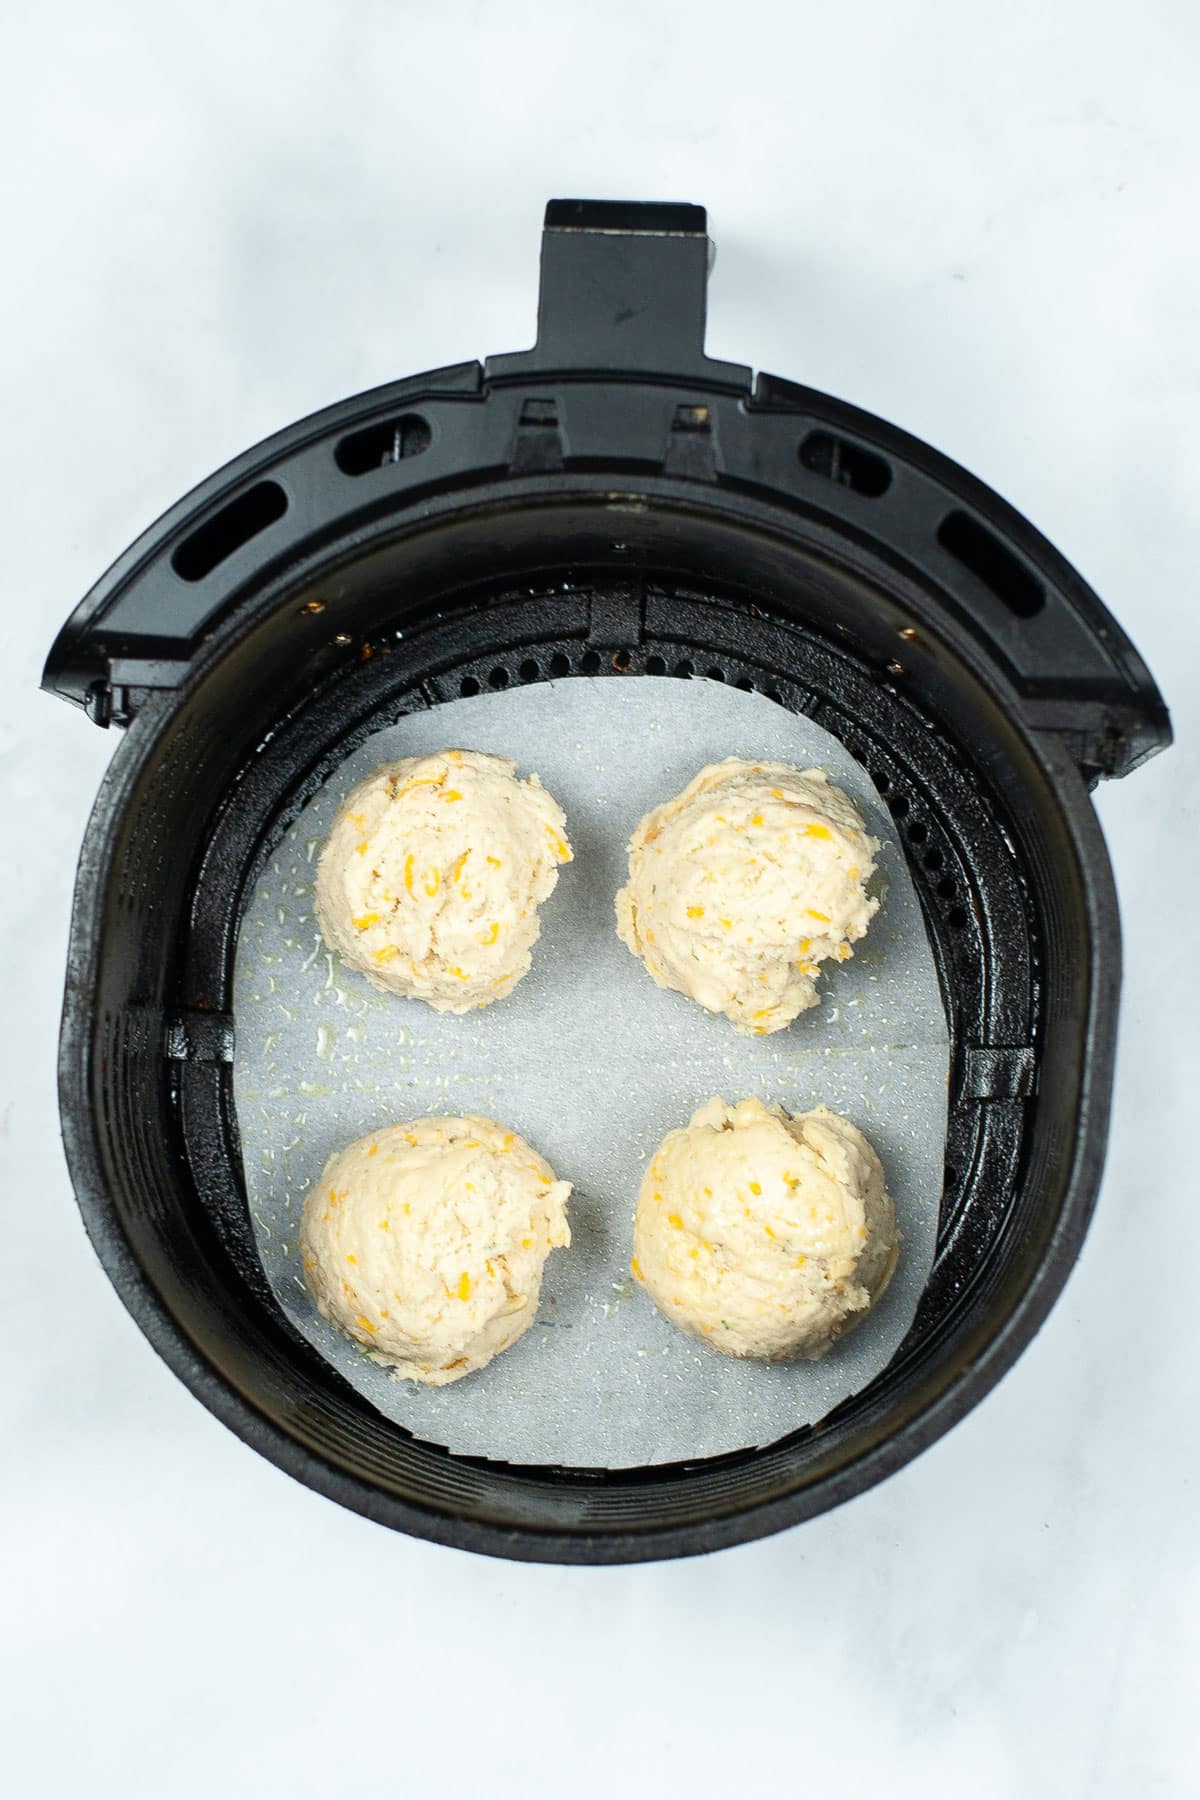 Scoops of Red Lobster Cheddar Biscuits in an air fryer